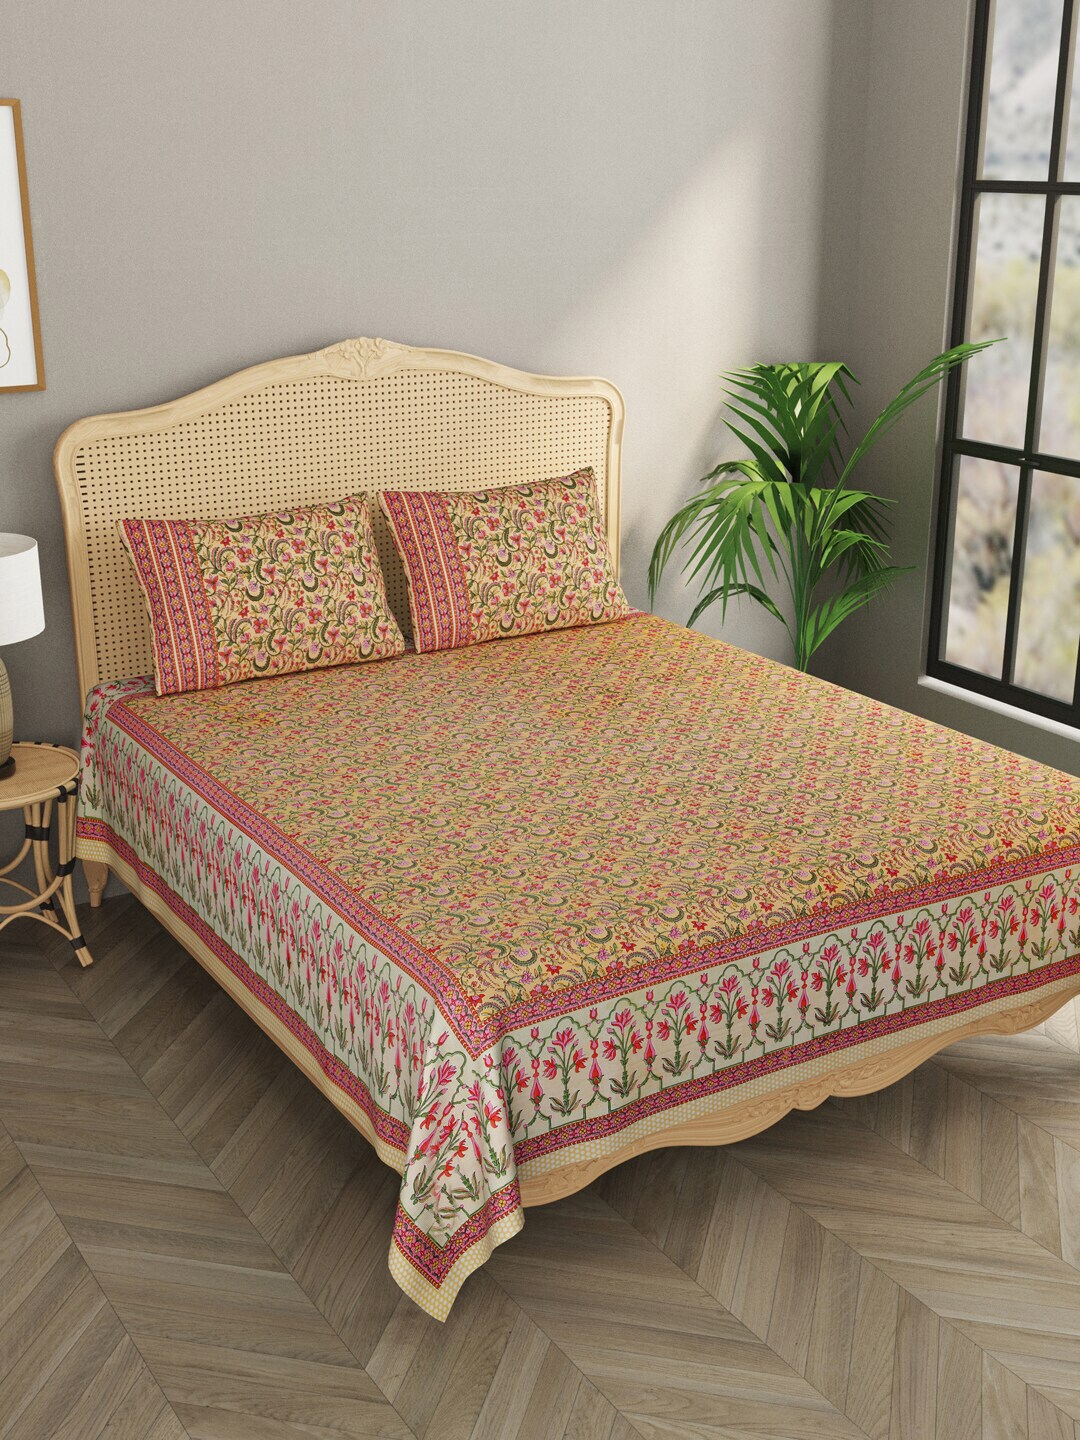 Gulaab Jaipur Orange & Green Floral 600 TC King Bedsheet with 2 Pillow Covers Price in India